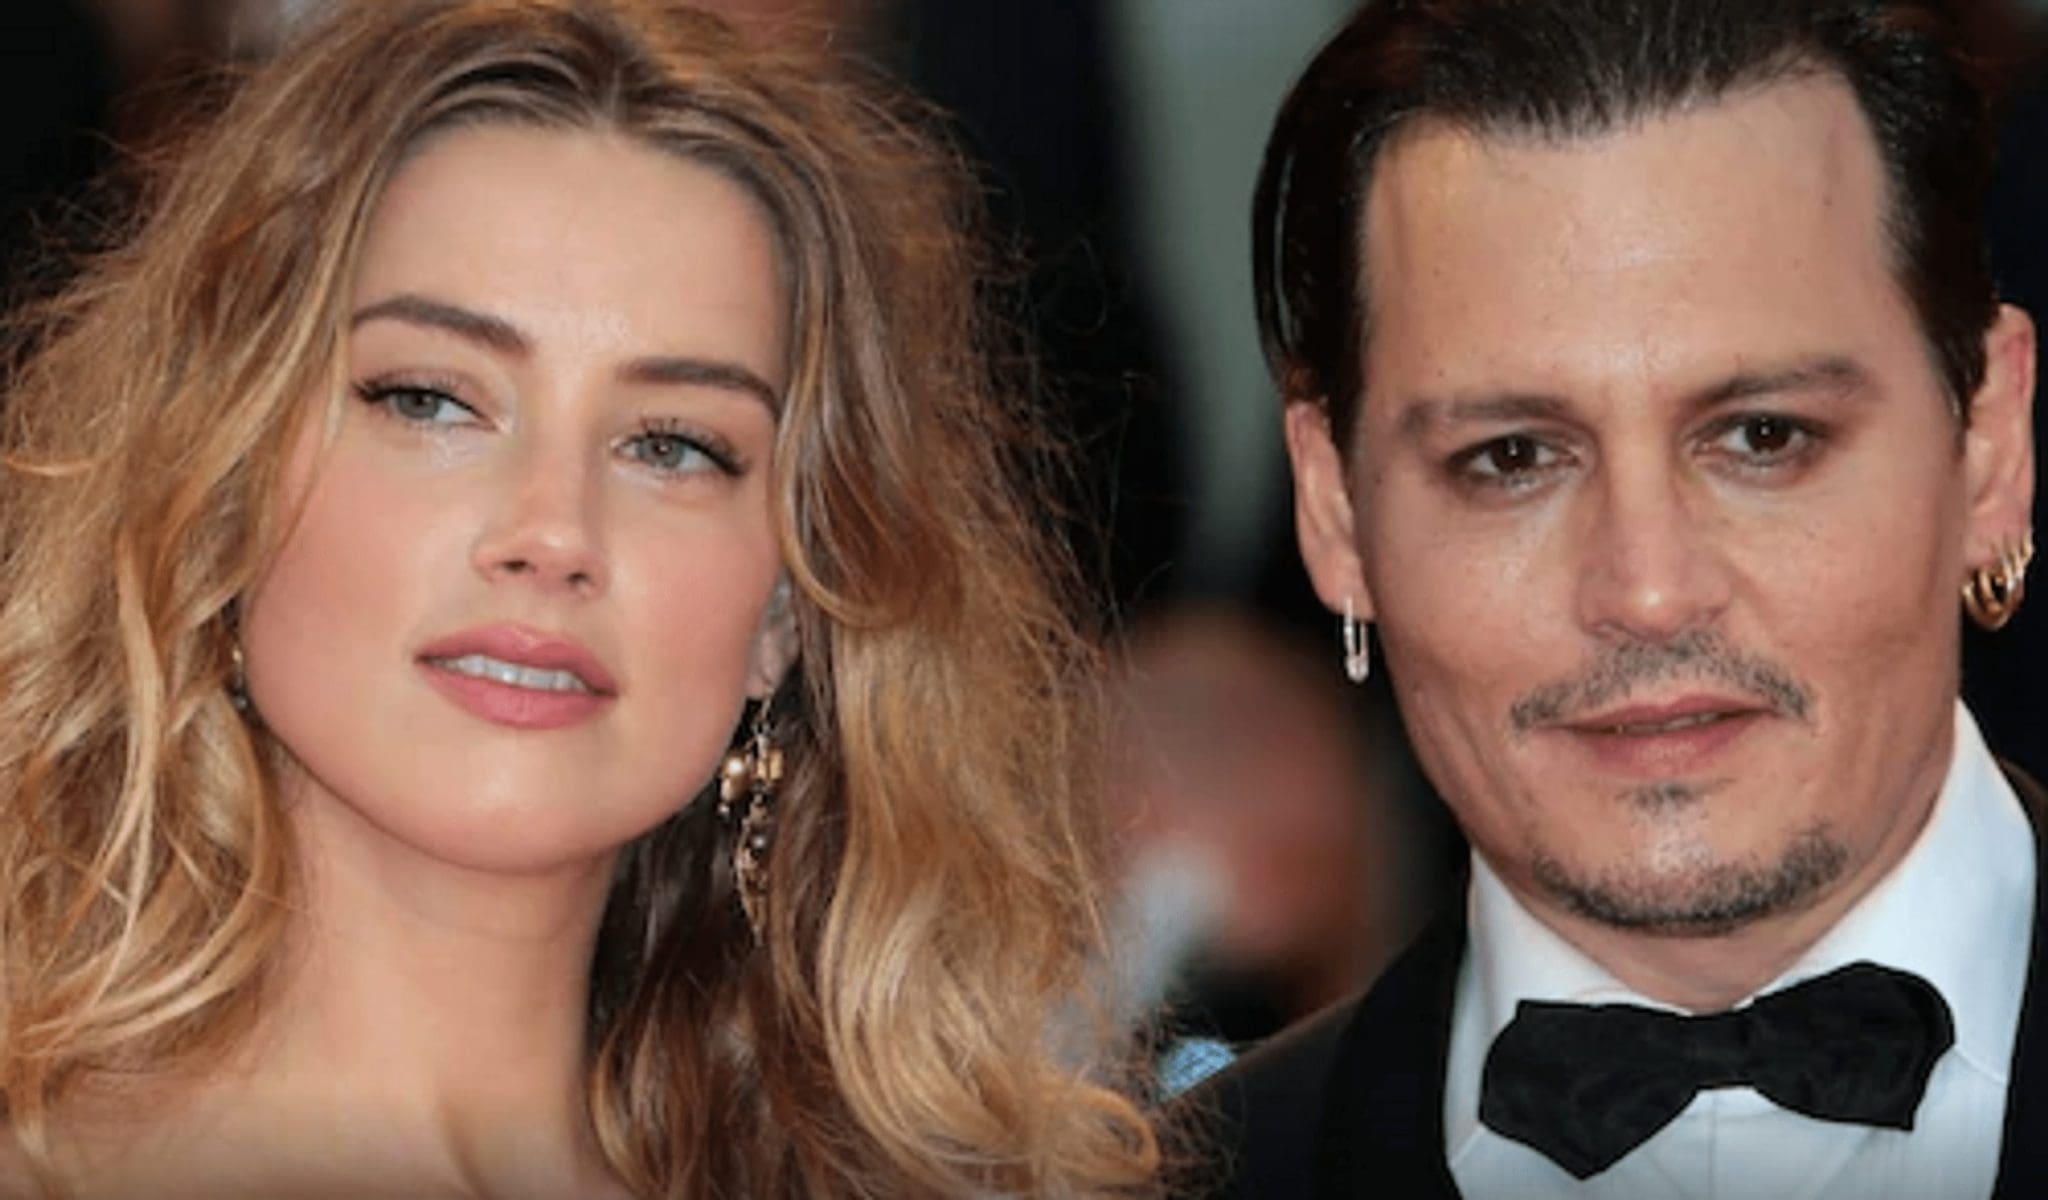 Johnny Depp plays a gig with Jeff Beck 2 weeks after Amber Heard wins in court